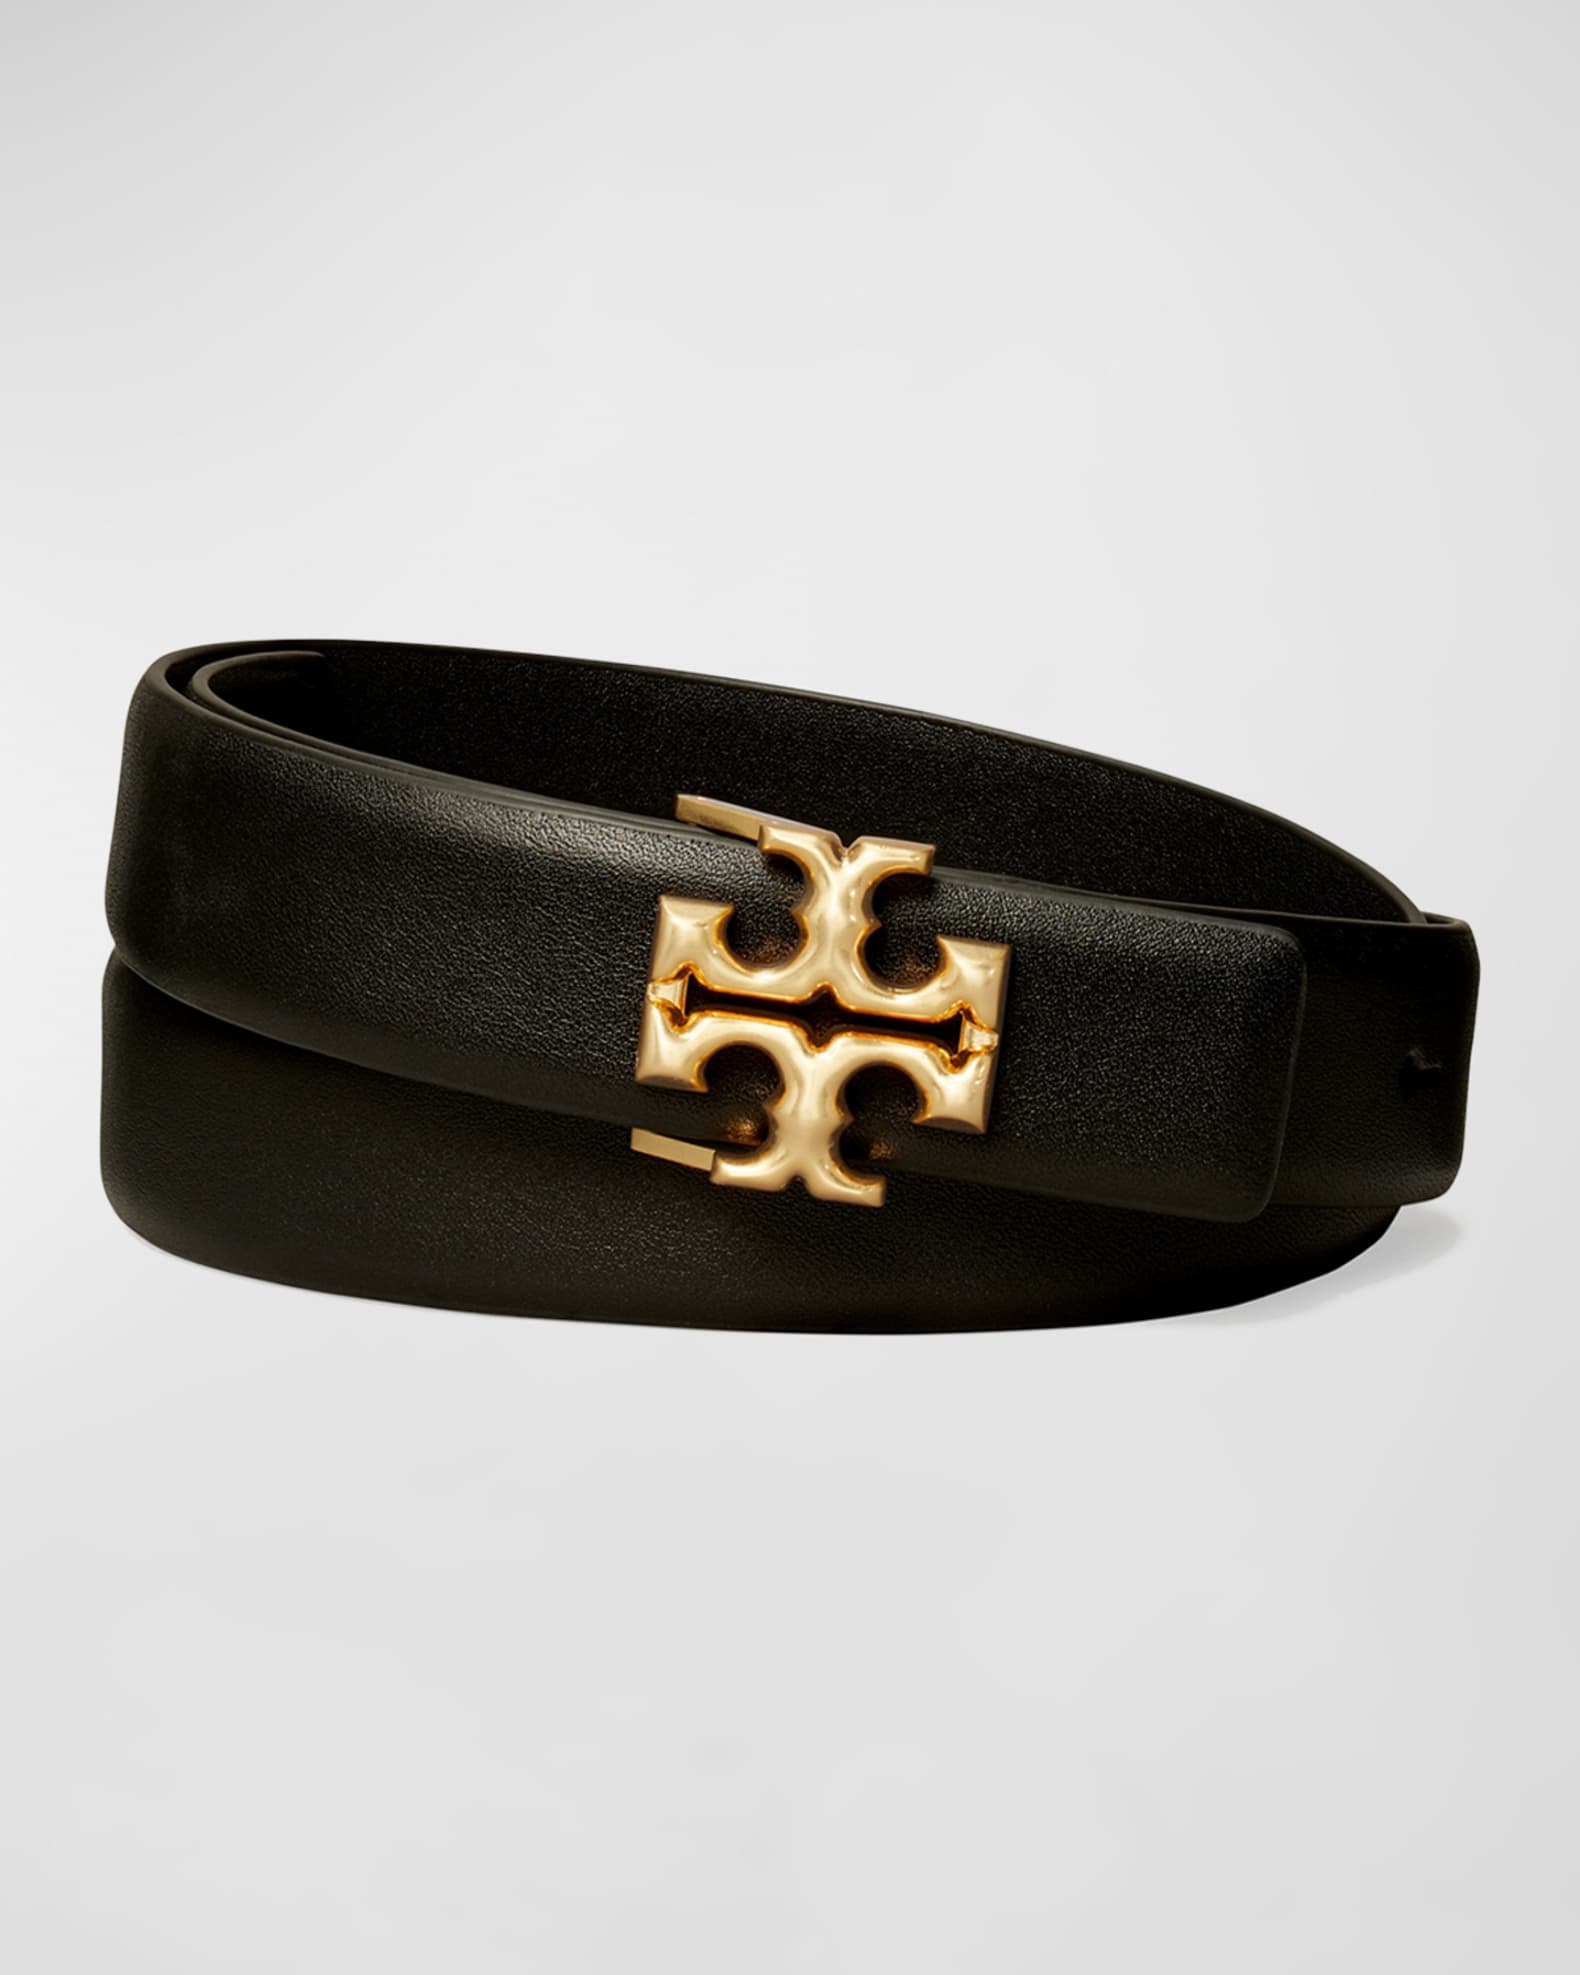 Tory Burch Reversible belt with logo, Women's Accessories